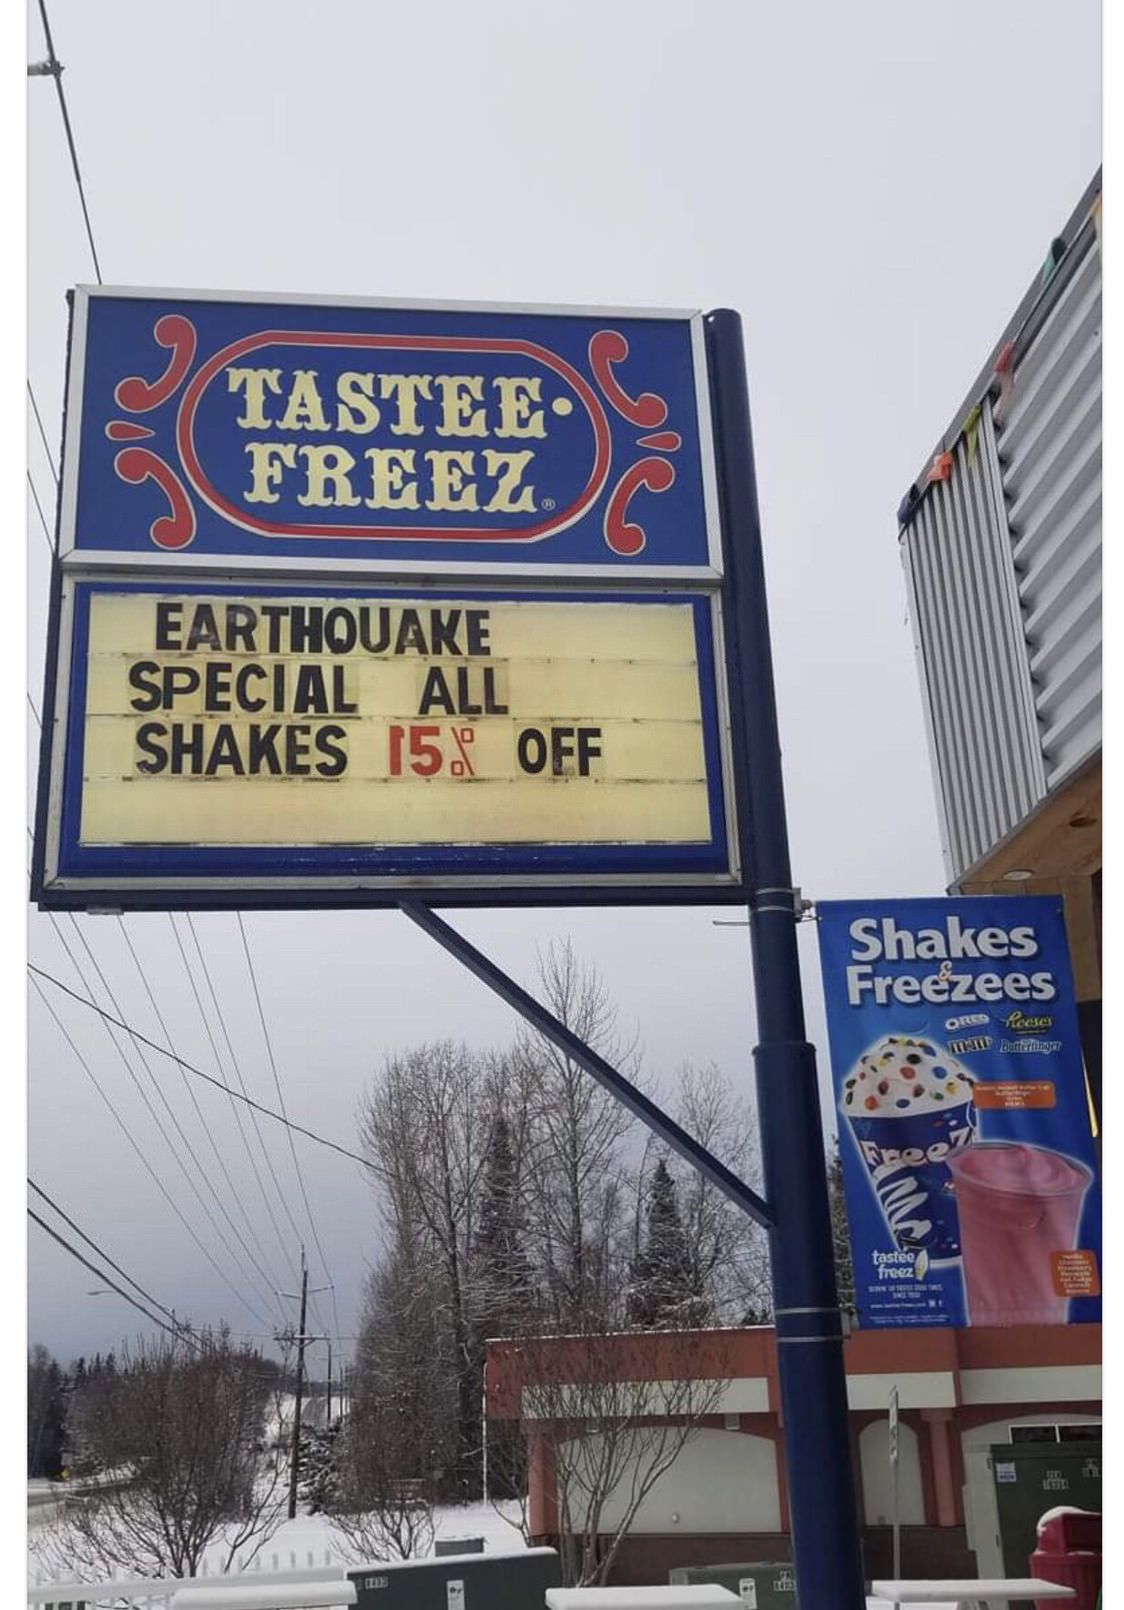 Tastee Freez in Anchorage today.